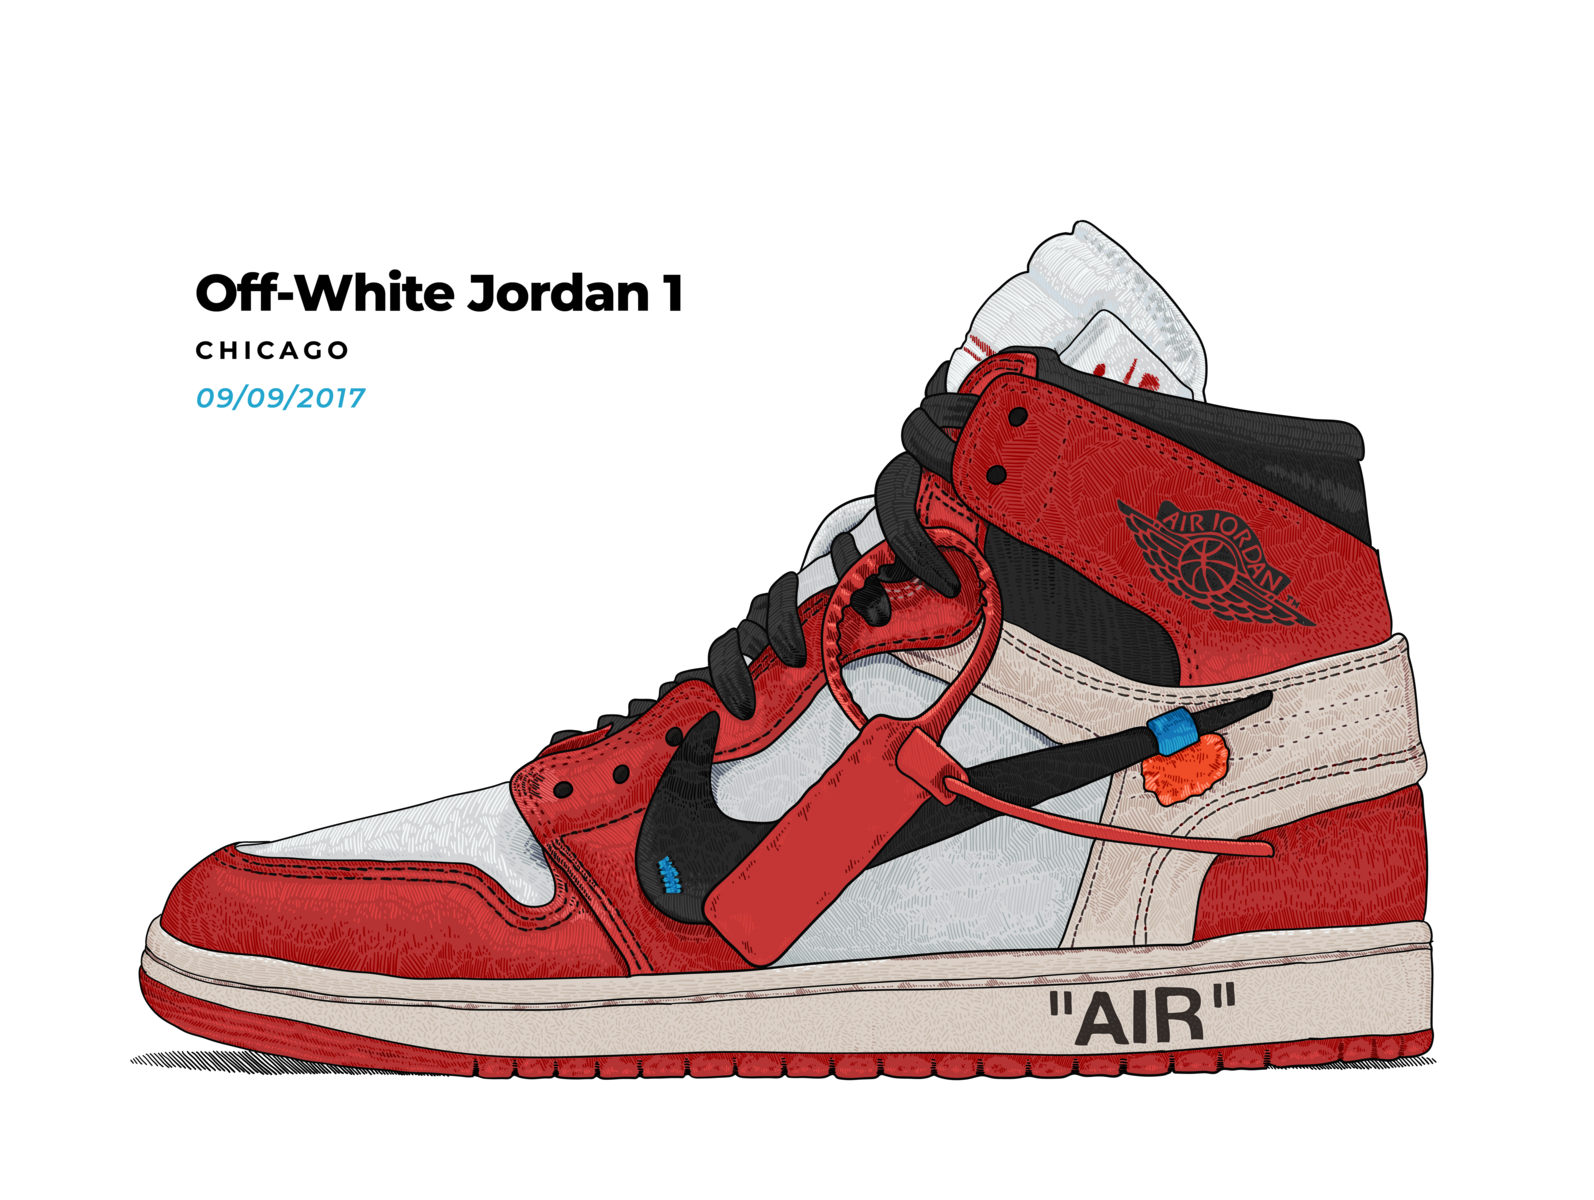 Off-White Chicago by Alex Baleno on Dribbble